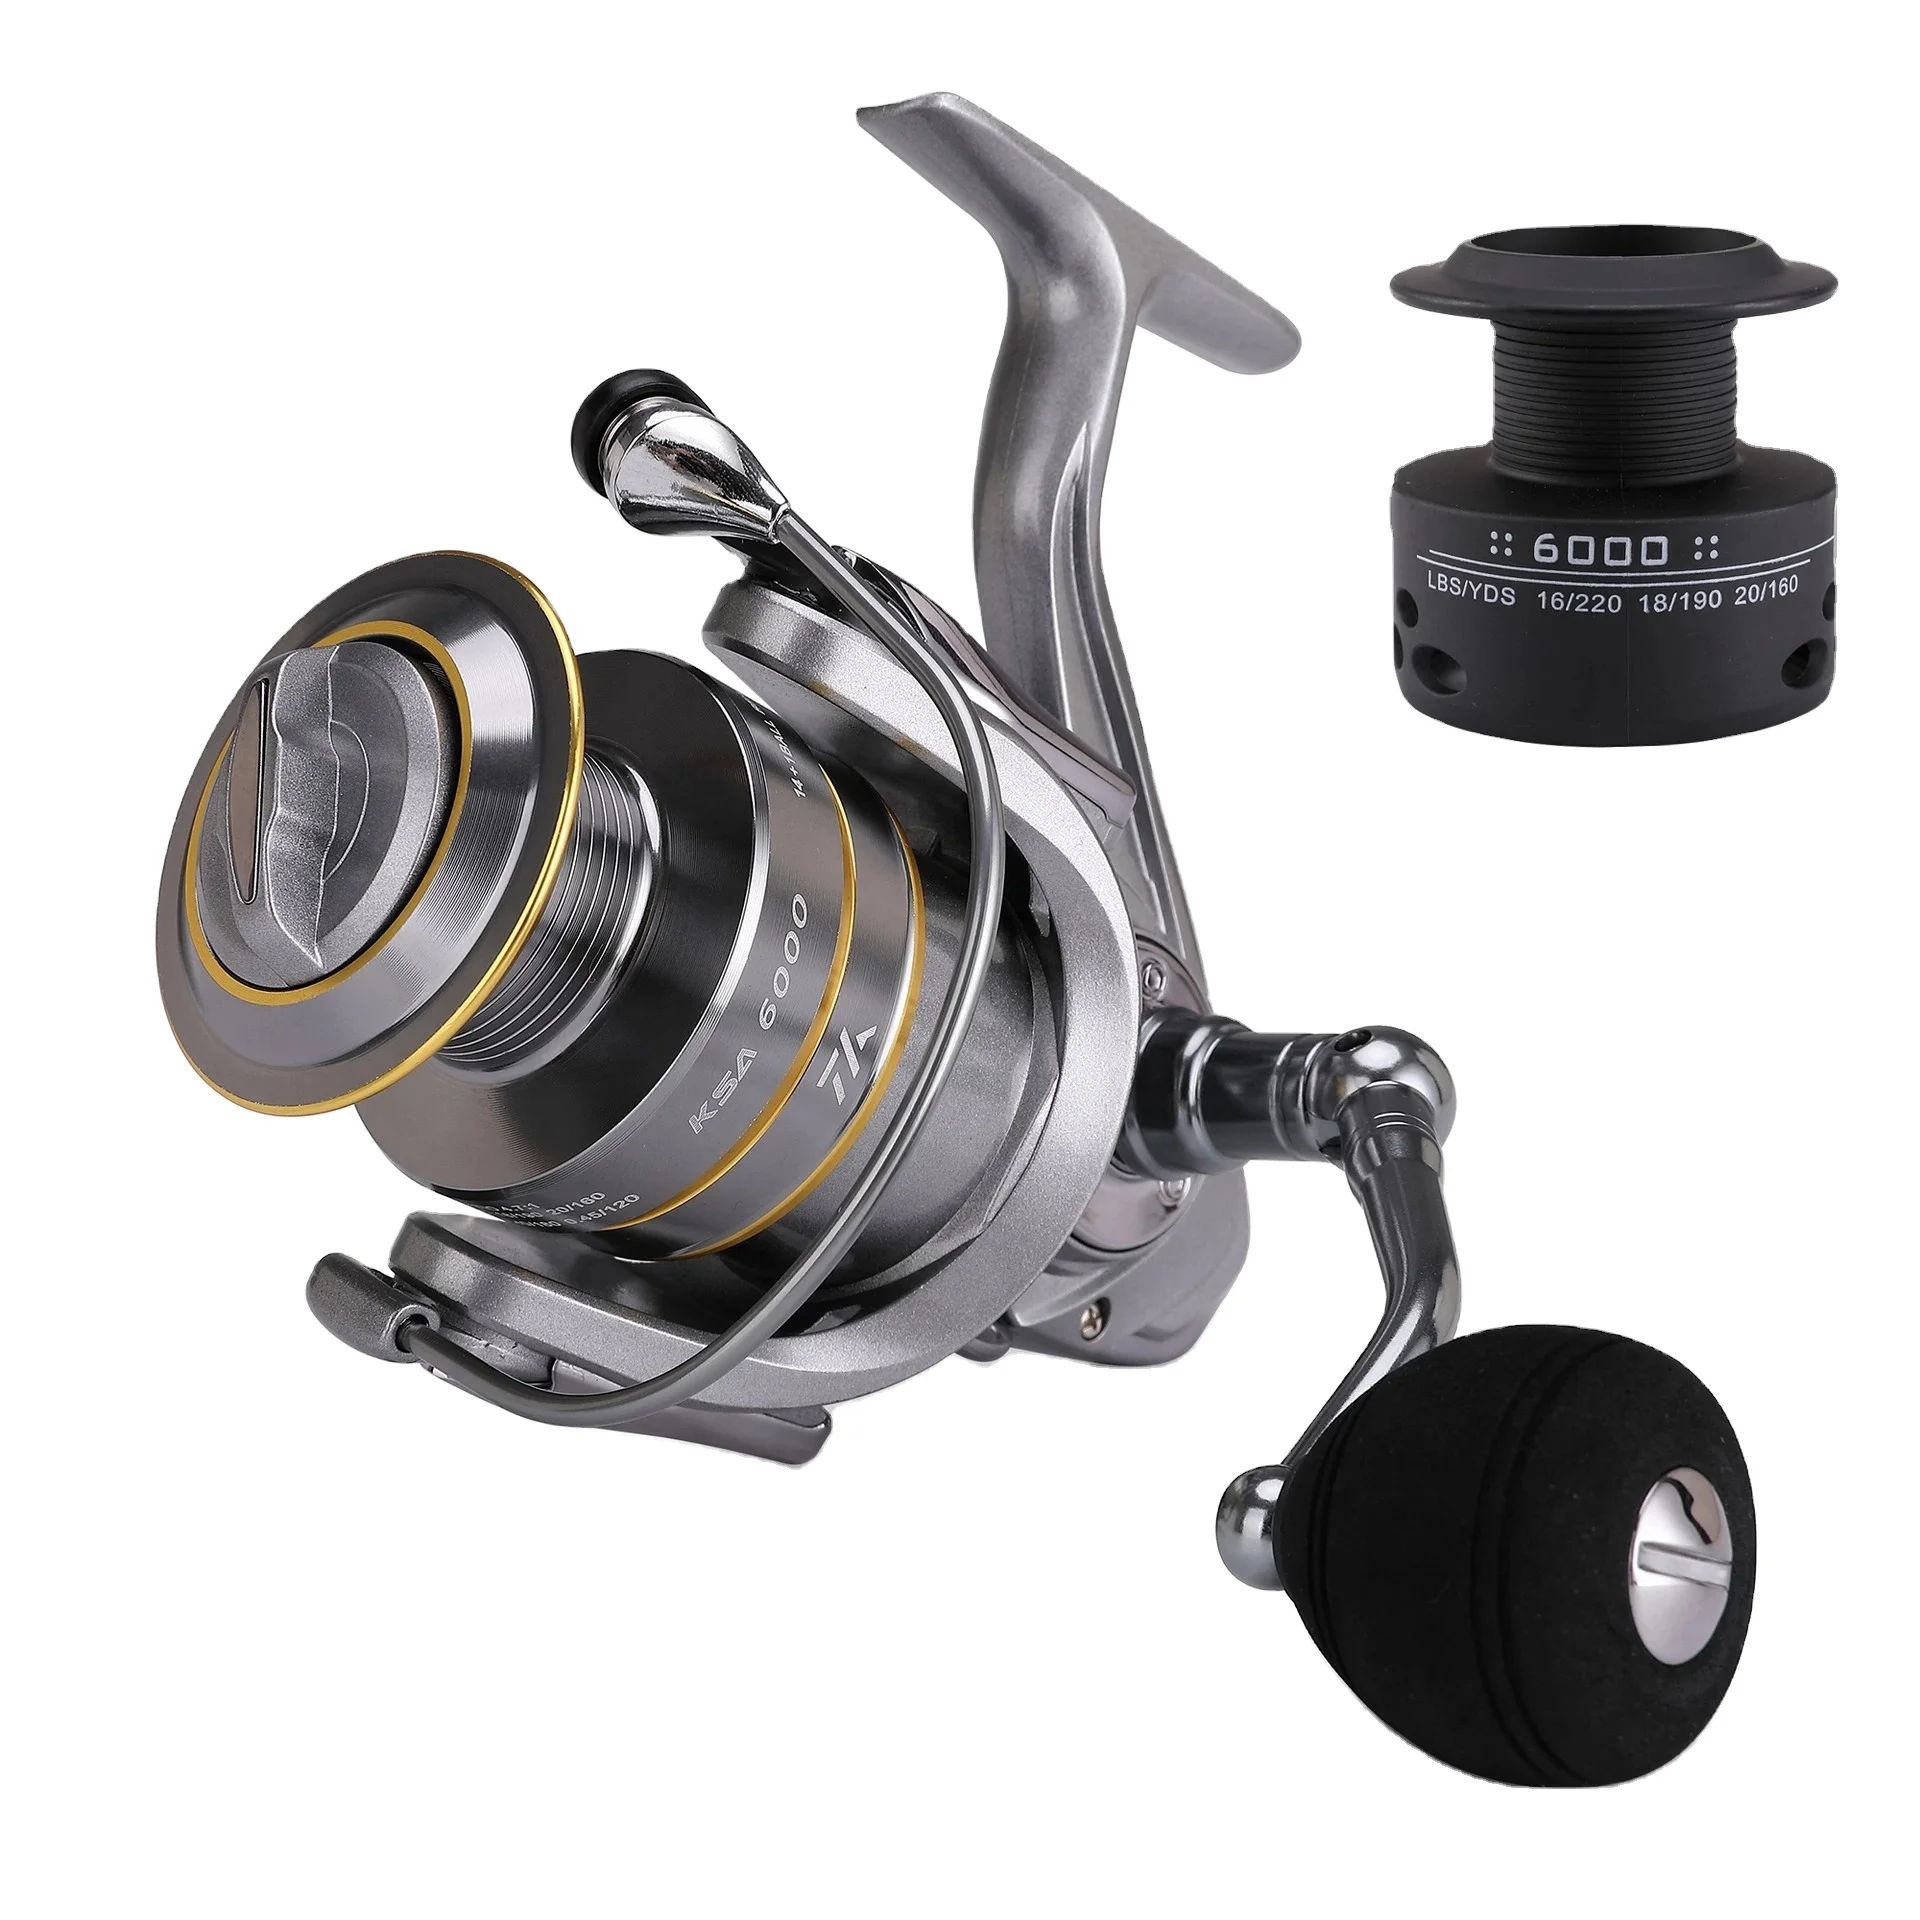 

JETSHARK Fishing Spinning Reel 15KG Max Drag Power 1000-7000 series Full Metal Double Spool Cup For Sea Fishing Gear, Silver